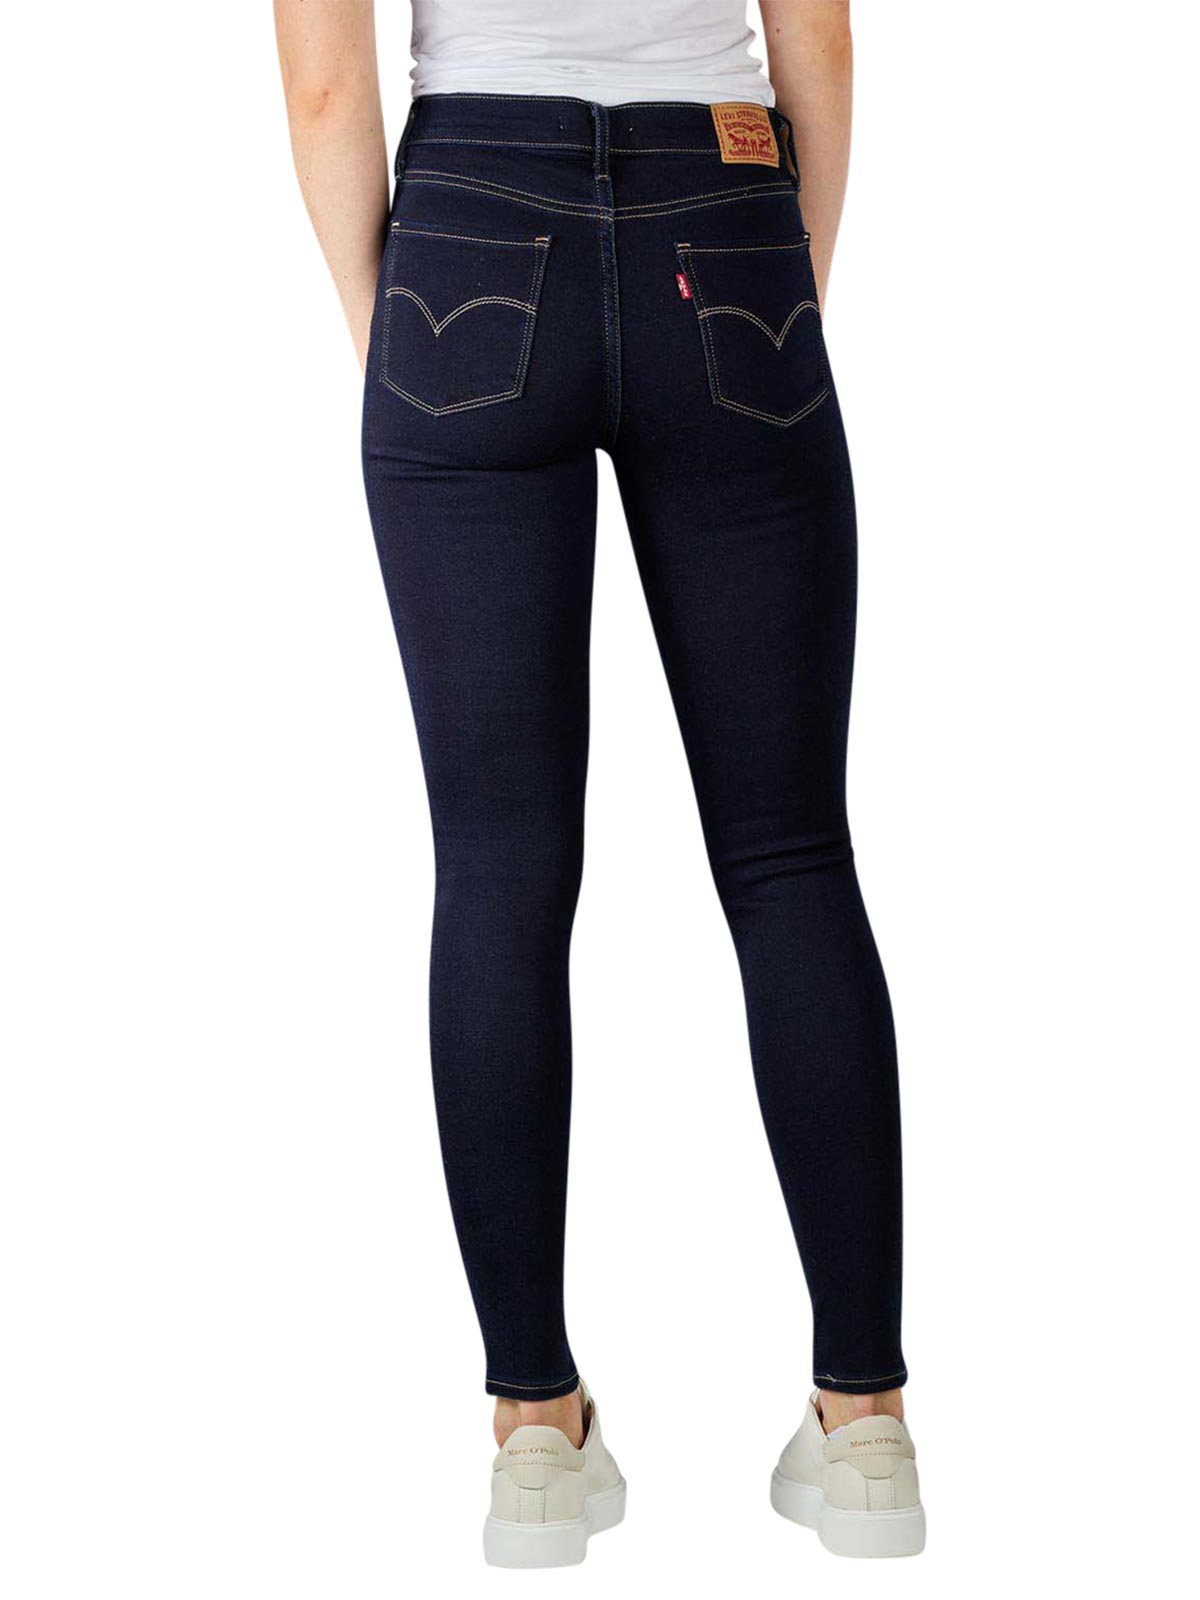 Levi's 720 Jeans Super Skinny high indigo atlas Levi's Women's Jeans | Free  Shipping on  - SIMPLY LOOK GOOD